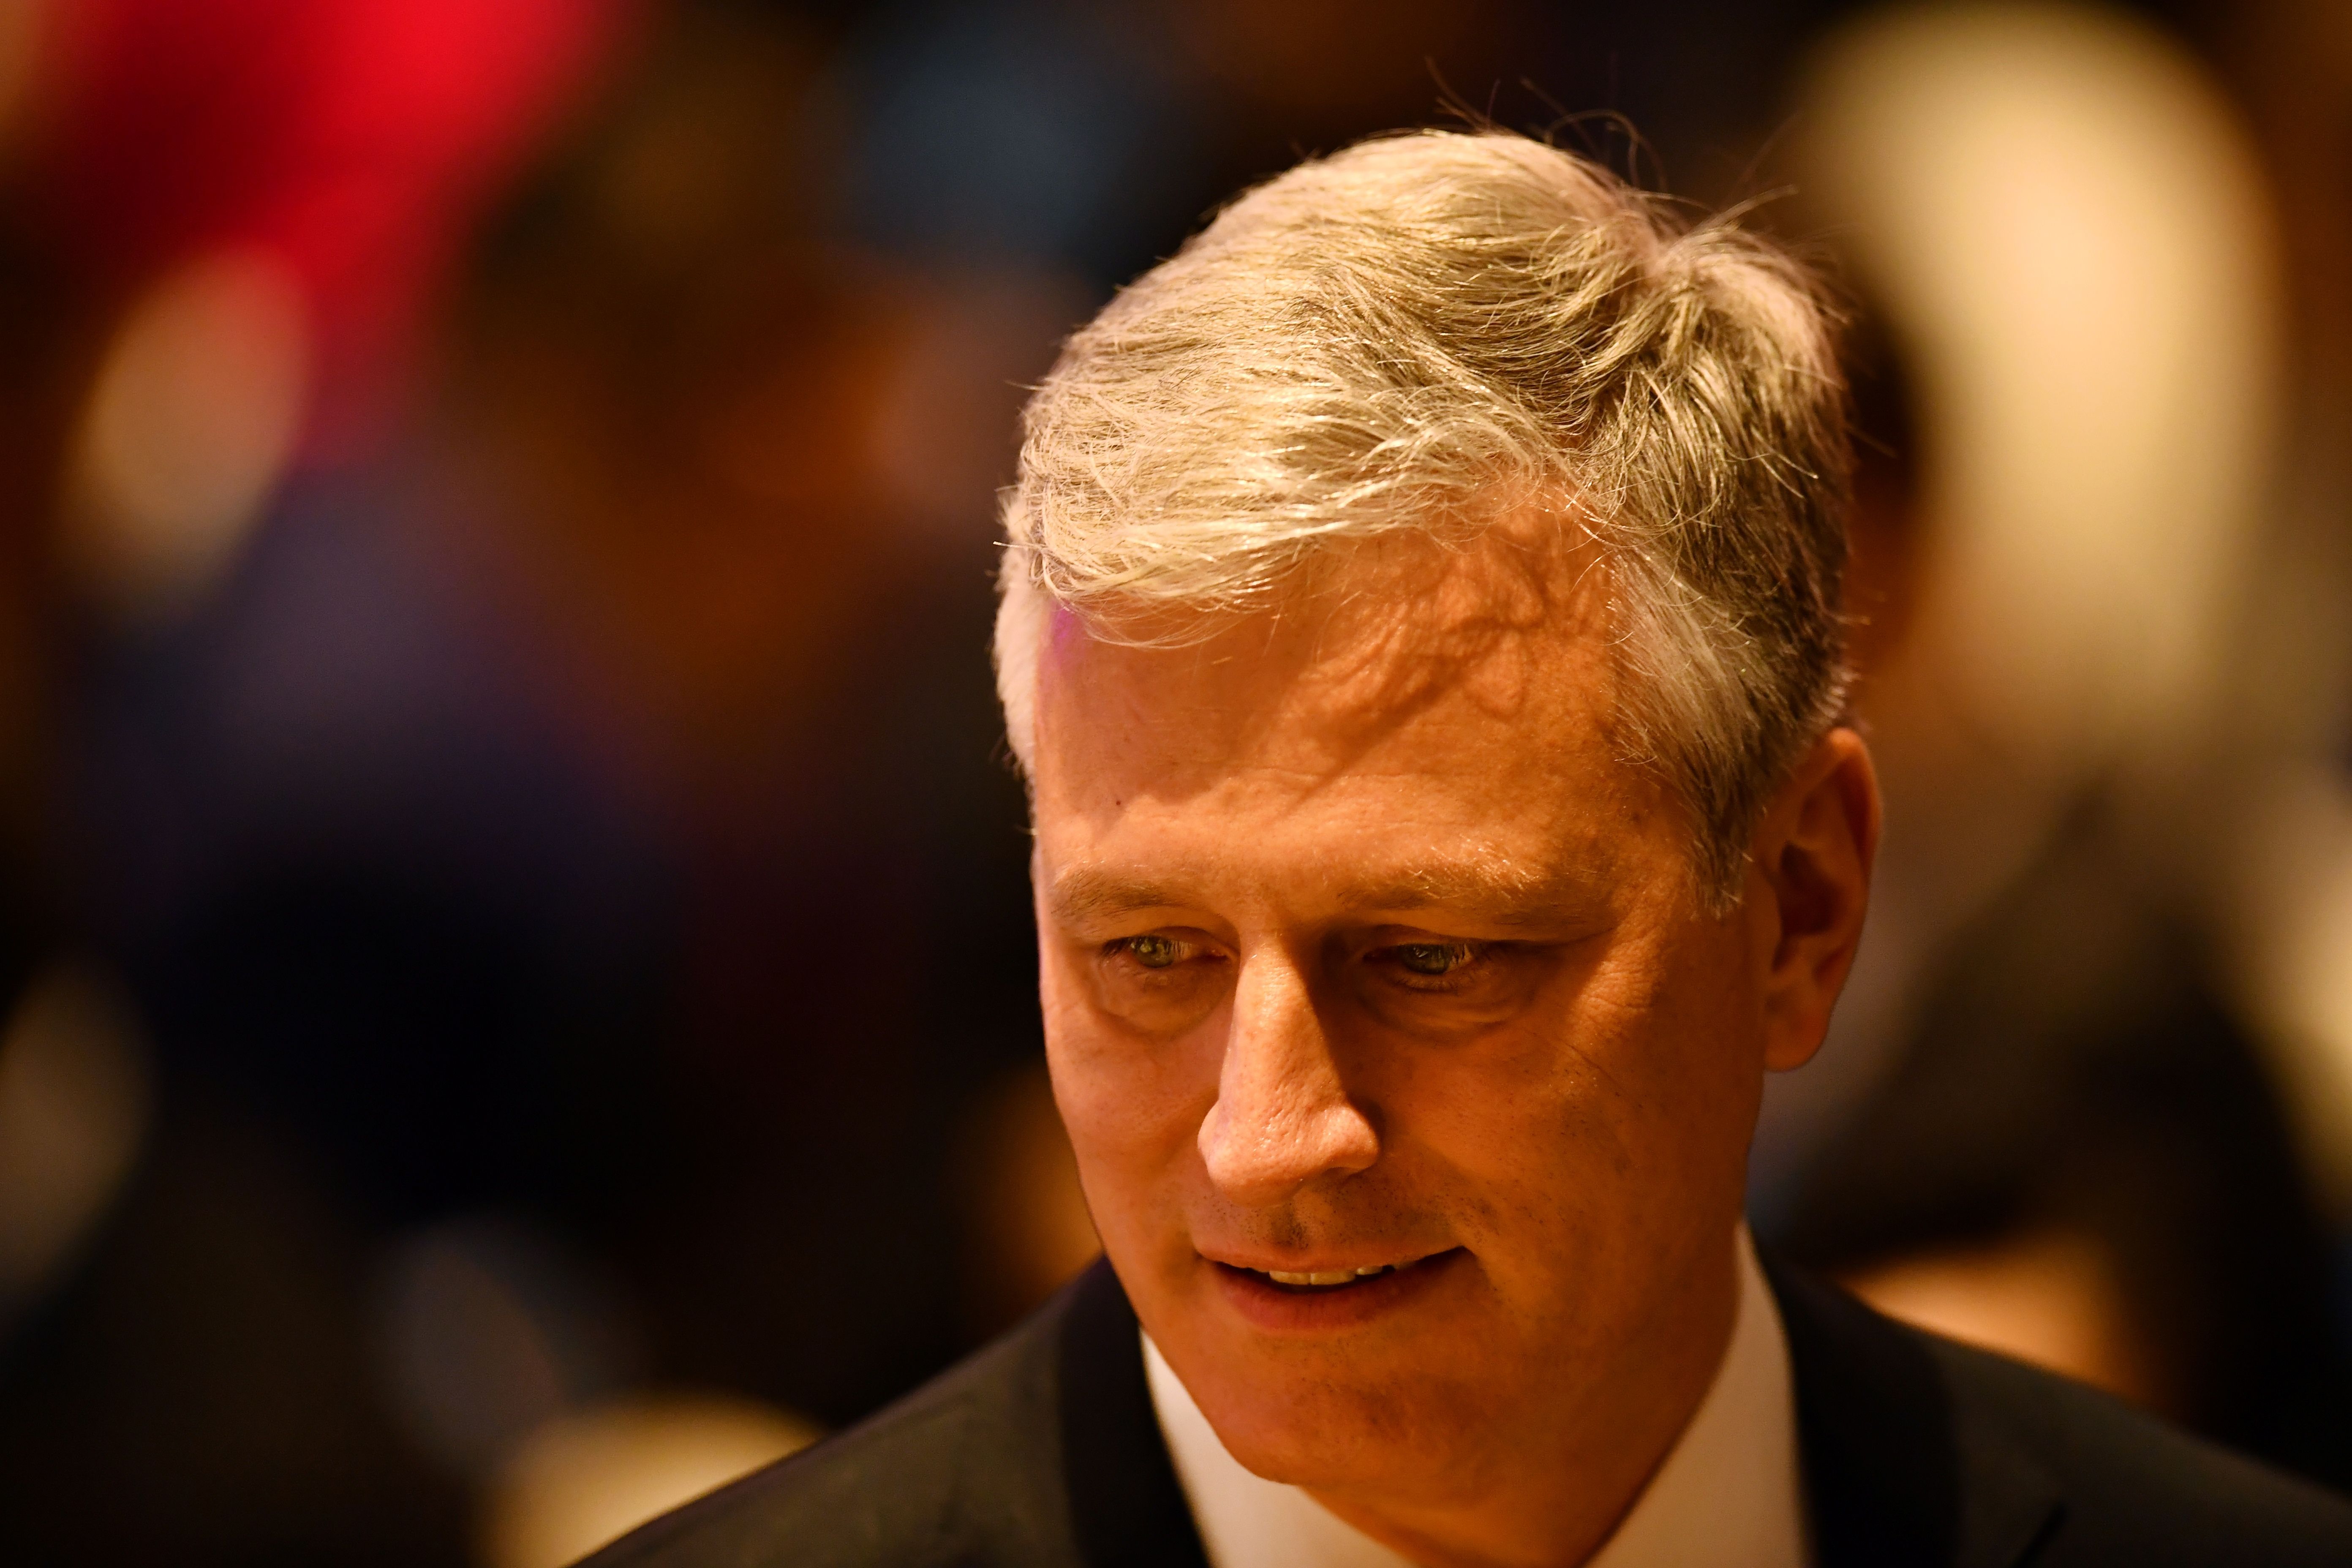 Robert O'Brien is seen in this file photograph from the 7th ASEAN-US Summit in Bangkok on November 4, 2019.